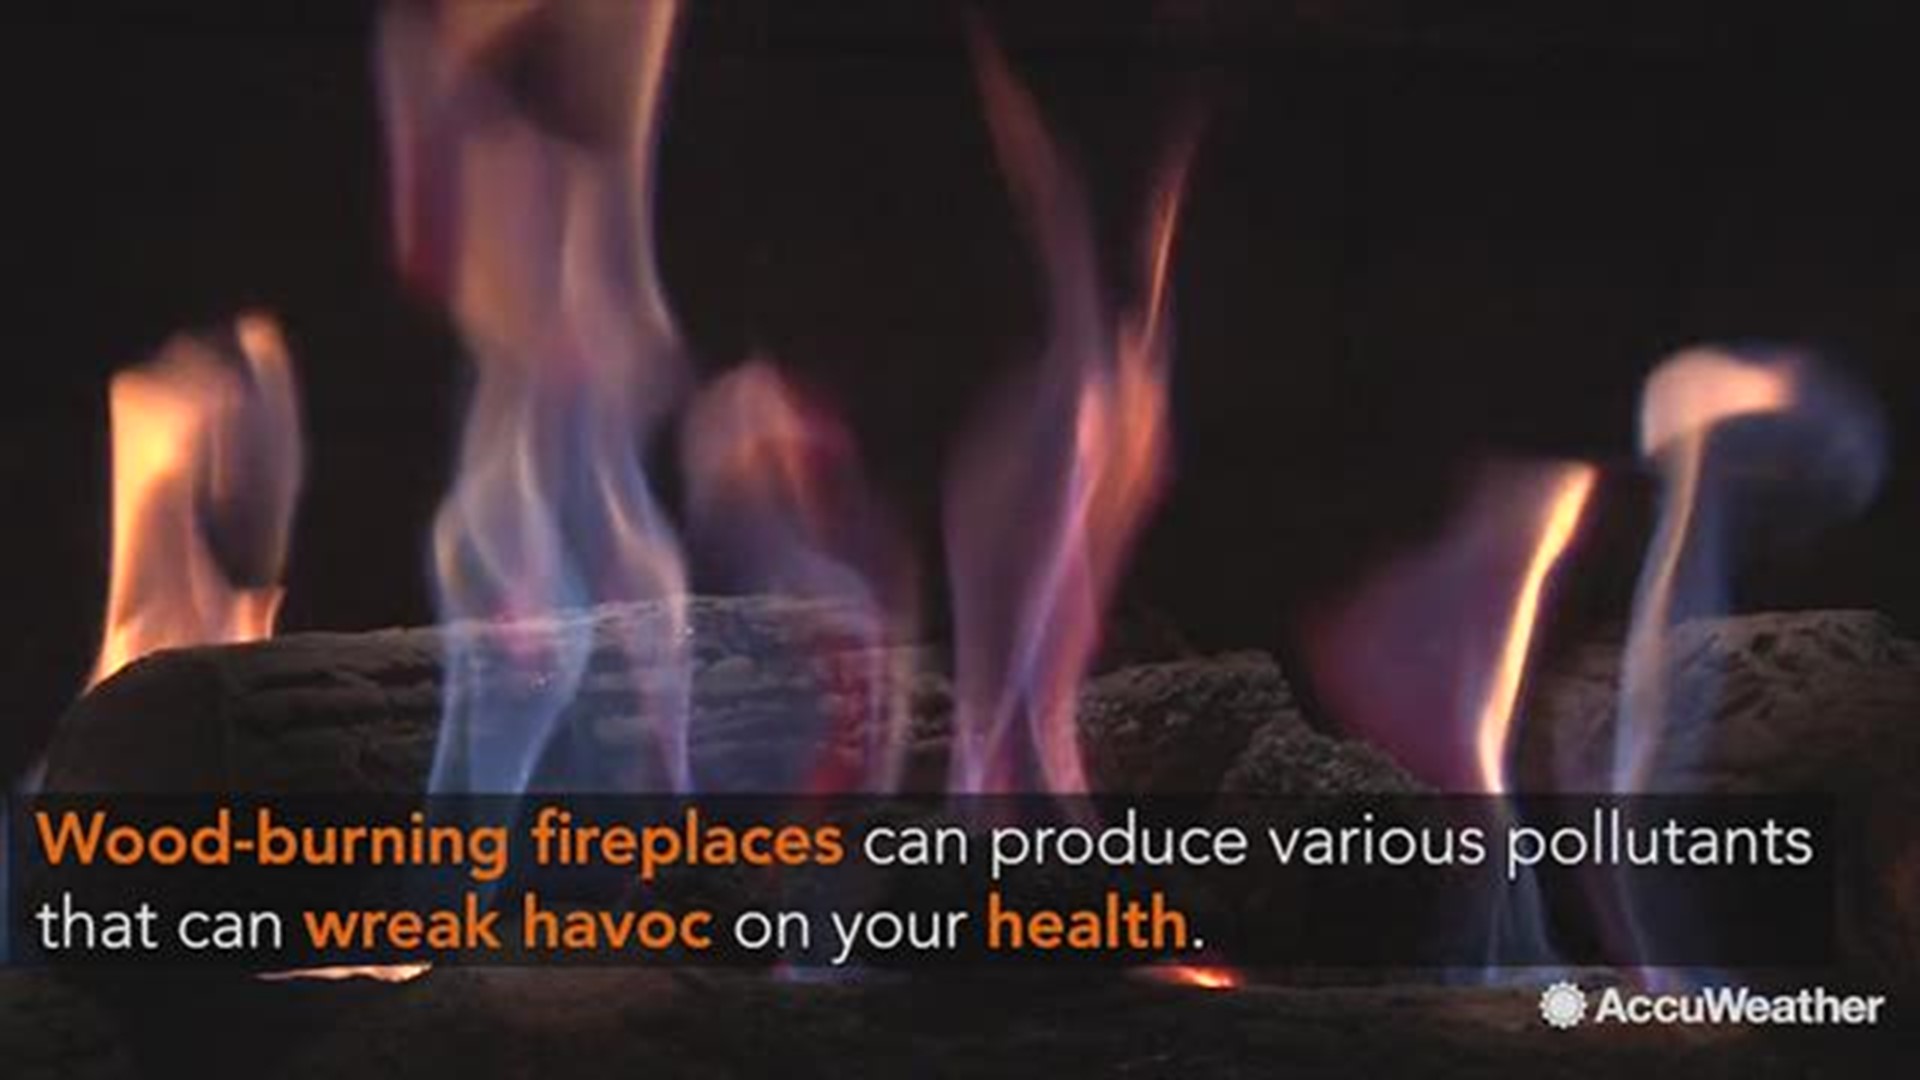 Frigid winter weather may prompt you to fire up that warm, cozy fireplace. However, a wood-burning fire in your fireplace can cause a number of health problems.